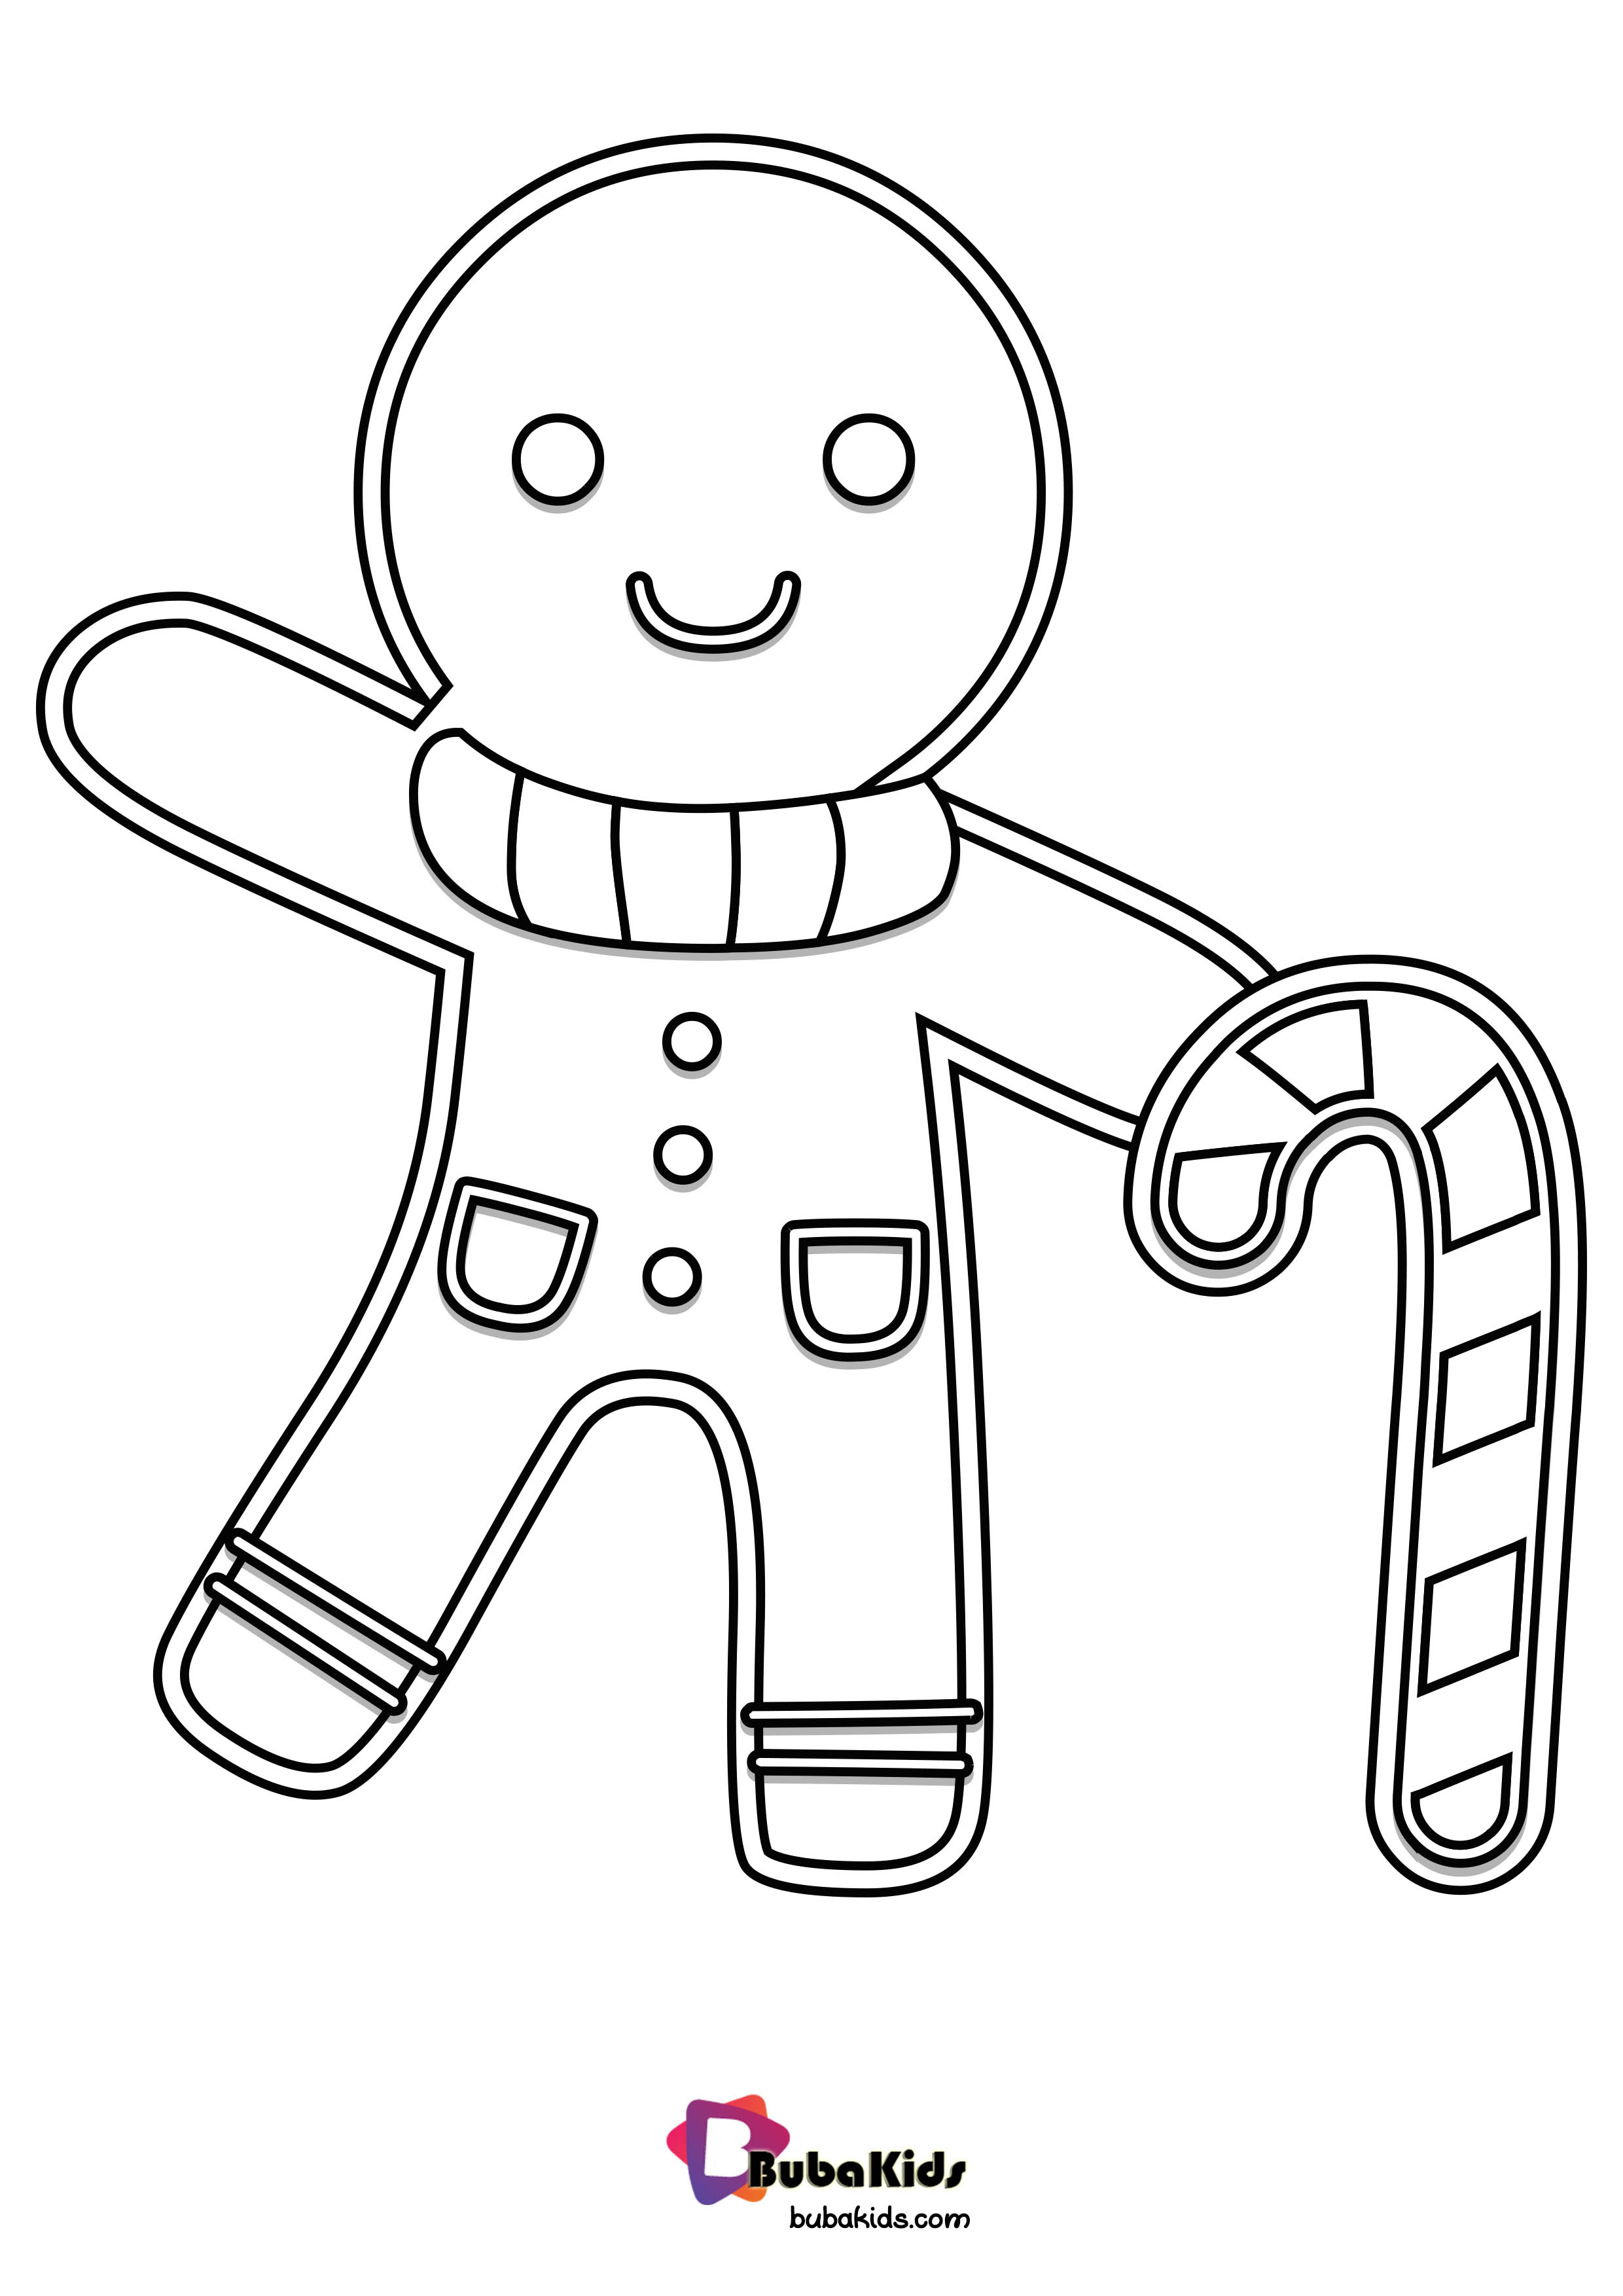 Gingerbread Coloring Page Download And Color it.! - BubaKids.com